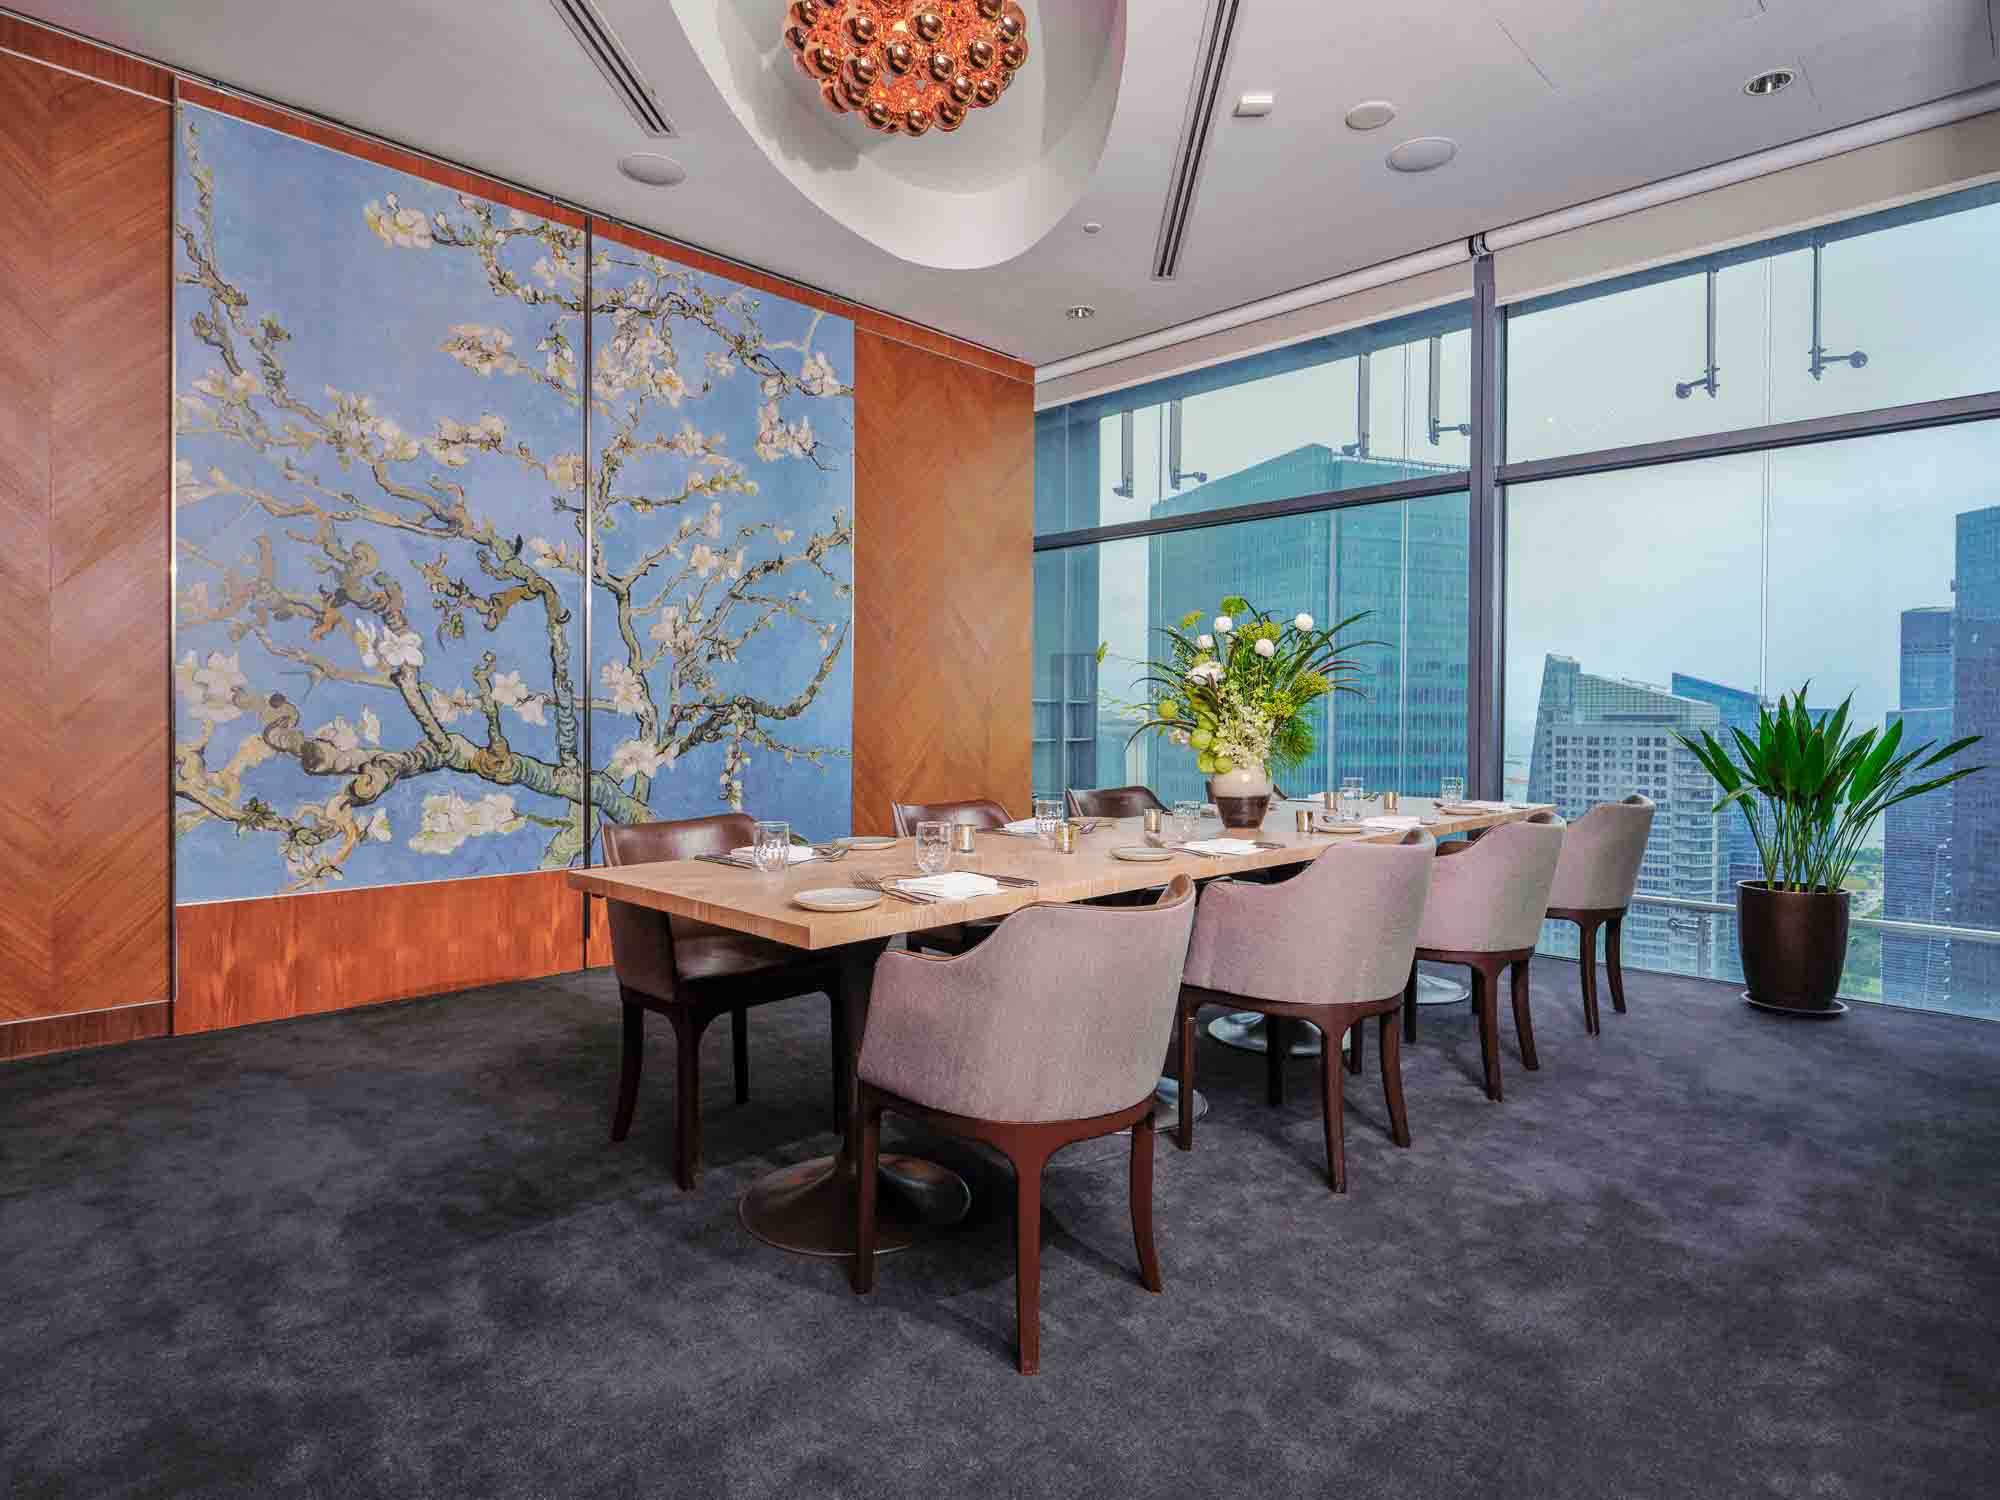 Private room in Artemis Restaurant with beautiful blue painting and long table